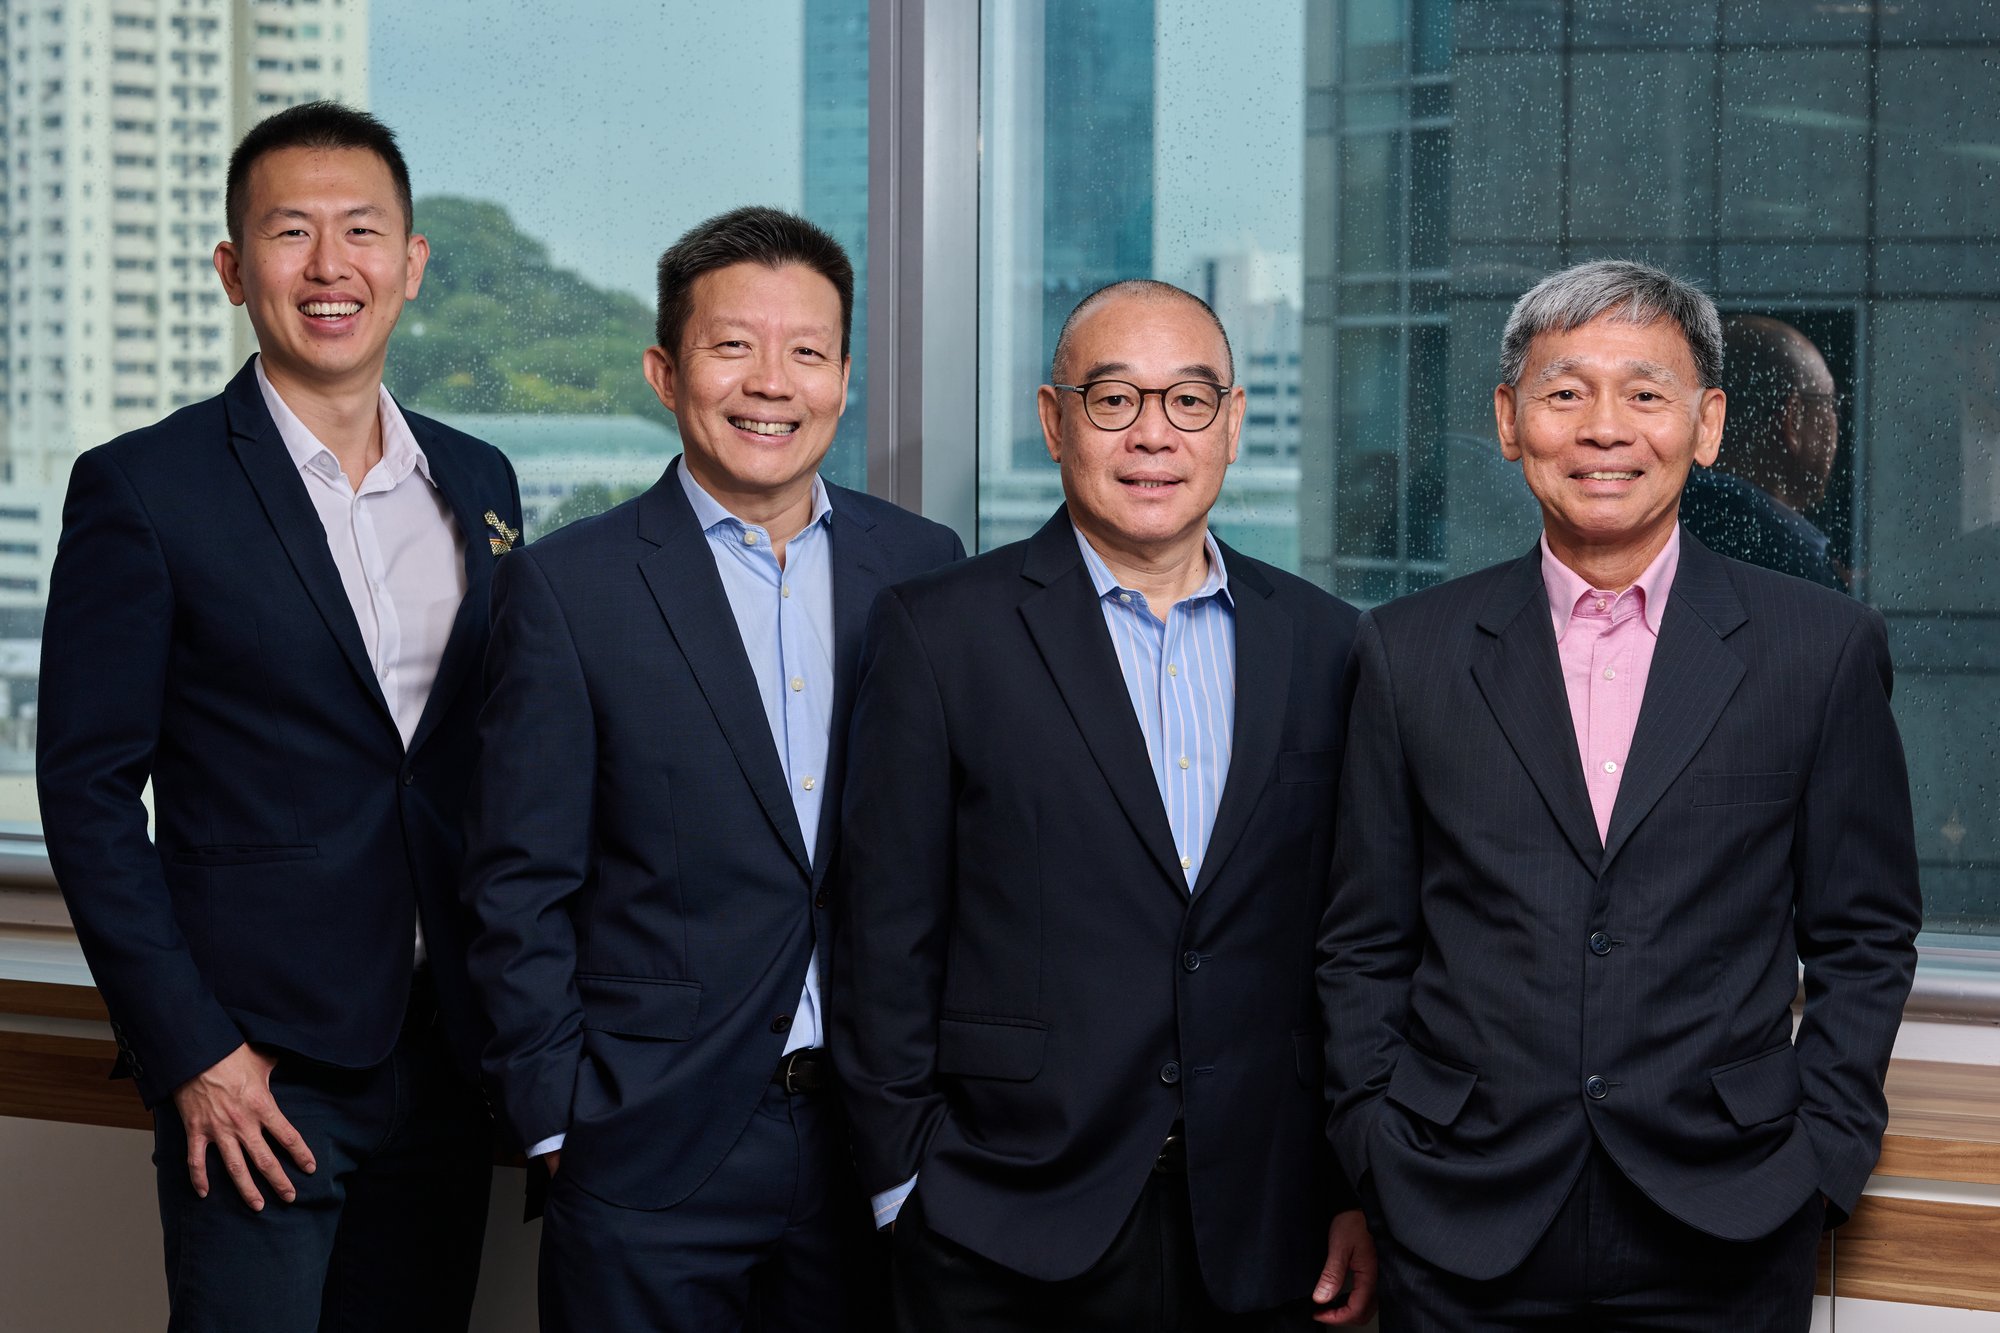 Aura Private Wealth Singapore team standing together against a city background